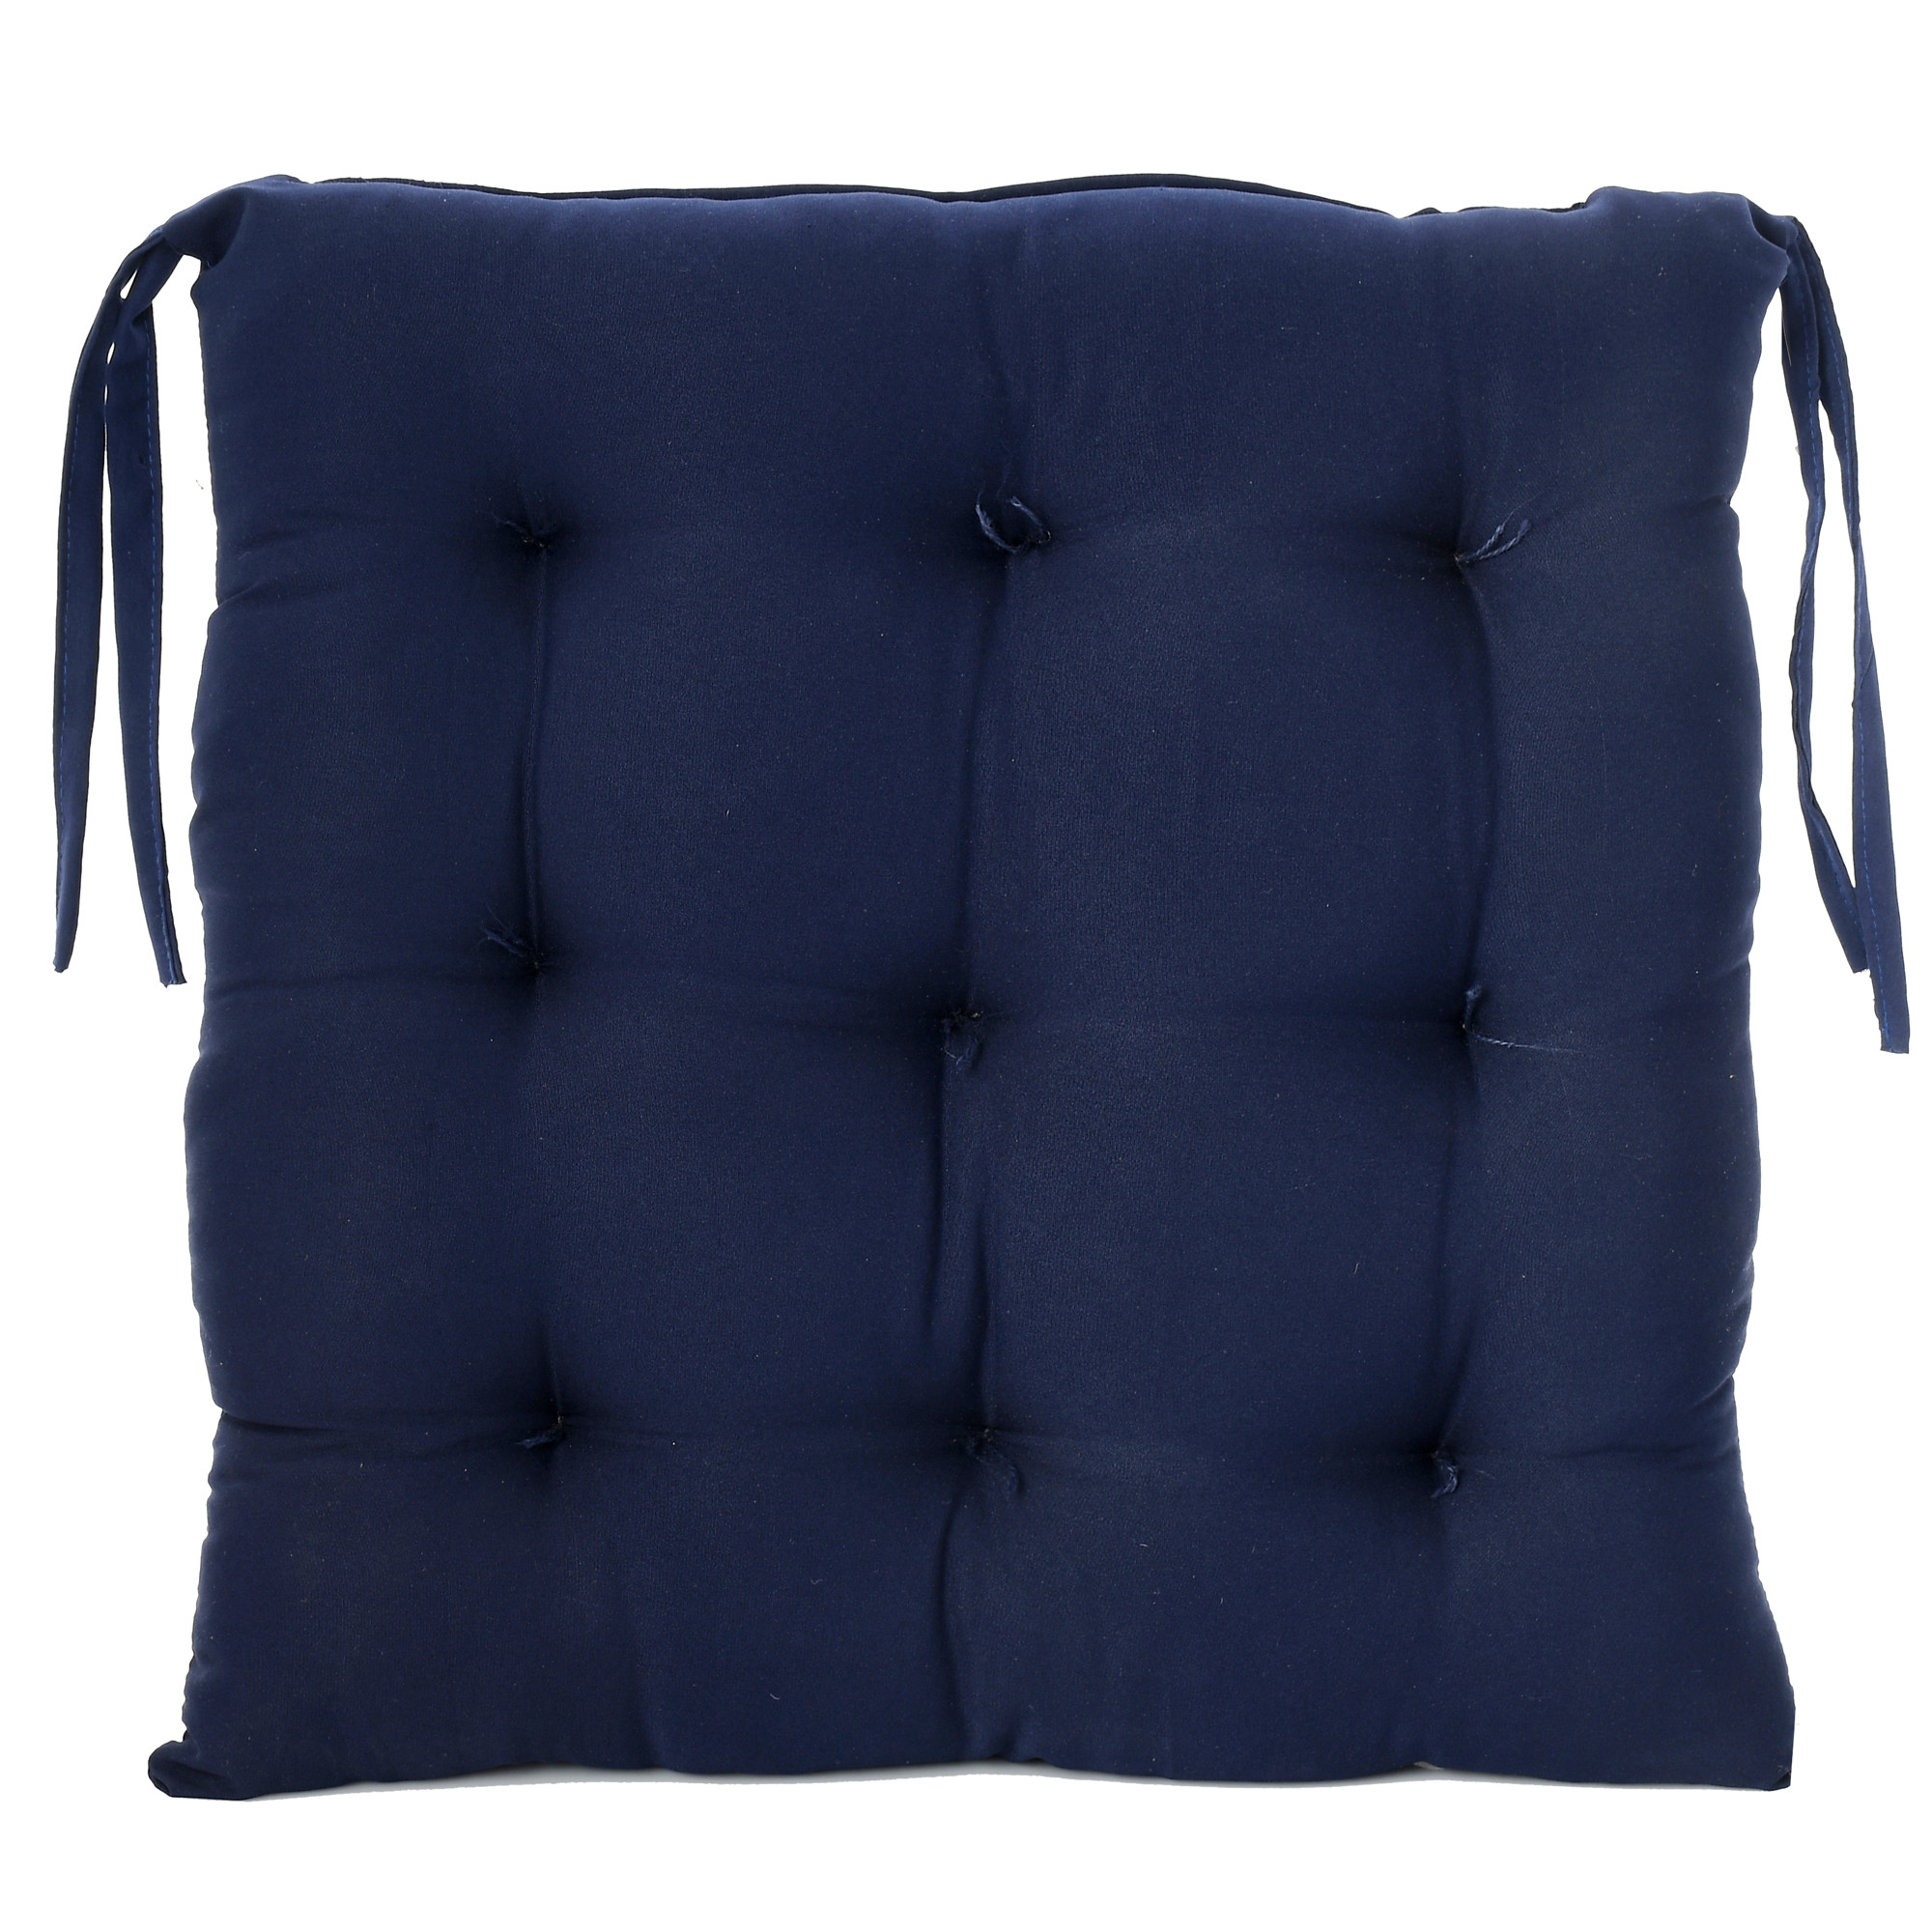 Kuber Industries Microfiber Square Chair Pad Seat Cushion For Car Pad, Office Chair, Indoor/Outdoor, Dining Living Room, Kitchen With Ties, 18*18 Inch (Navy Blue)